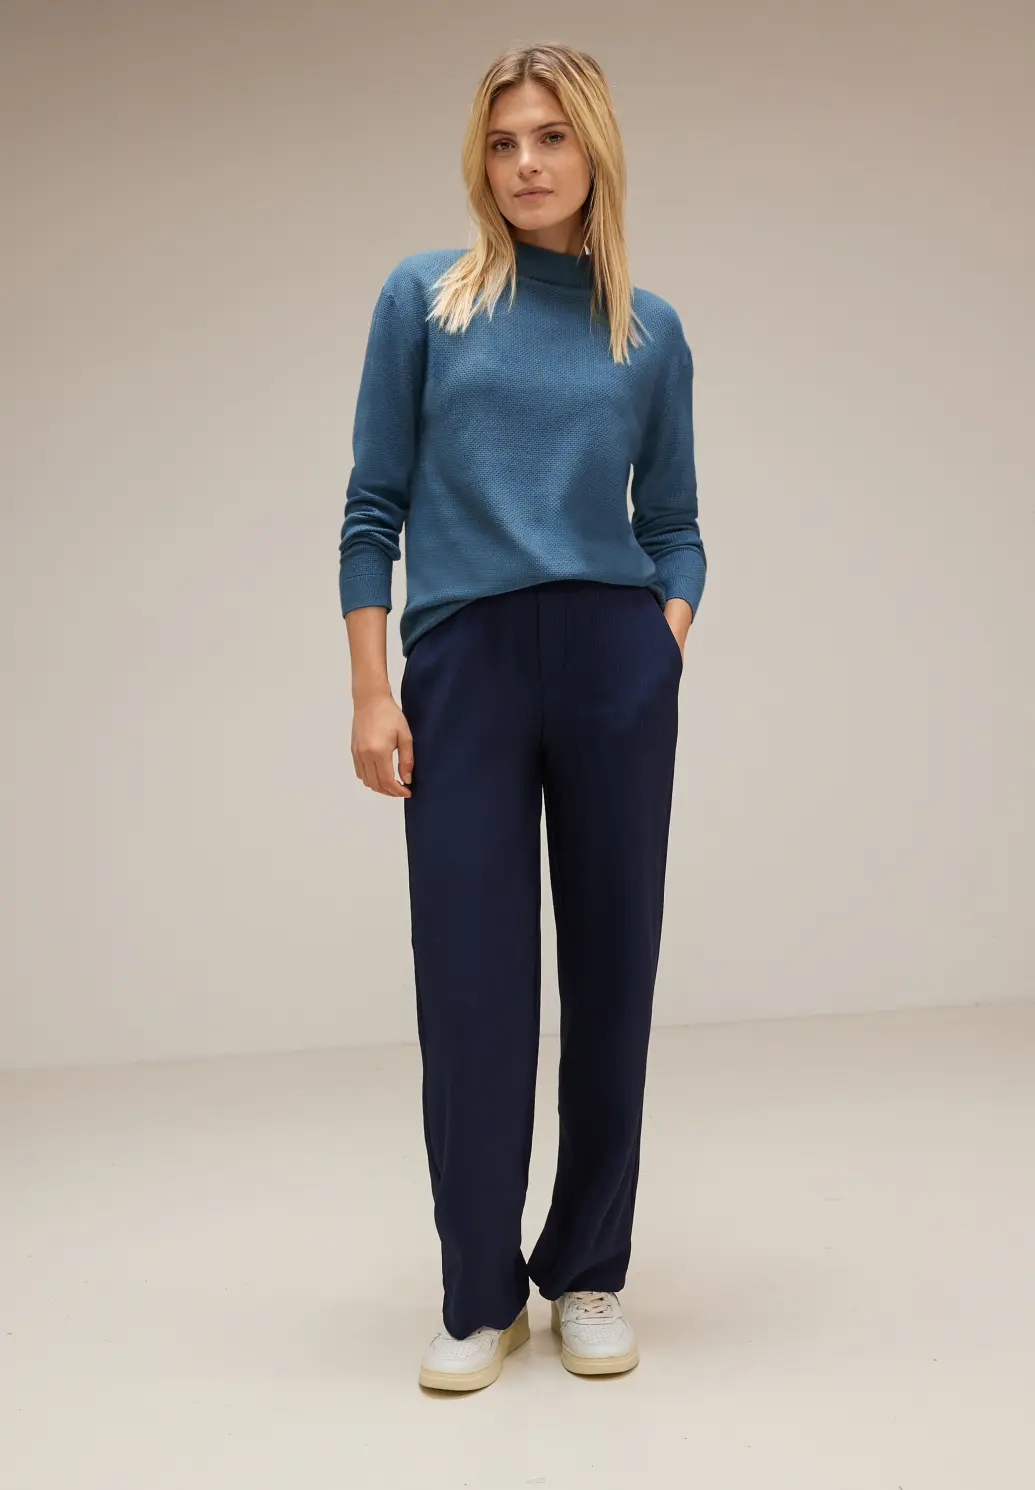 Melange Blues Structure Knit - One with Blue Cotton - Satin Jumper Street |